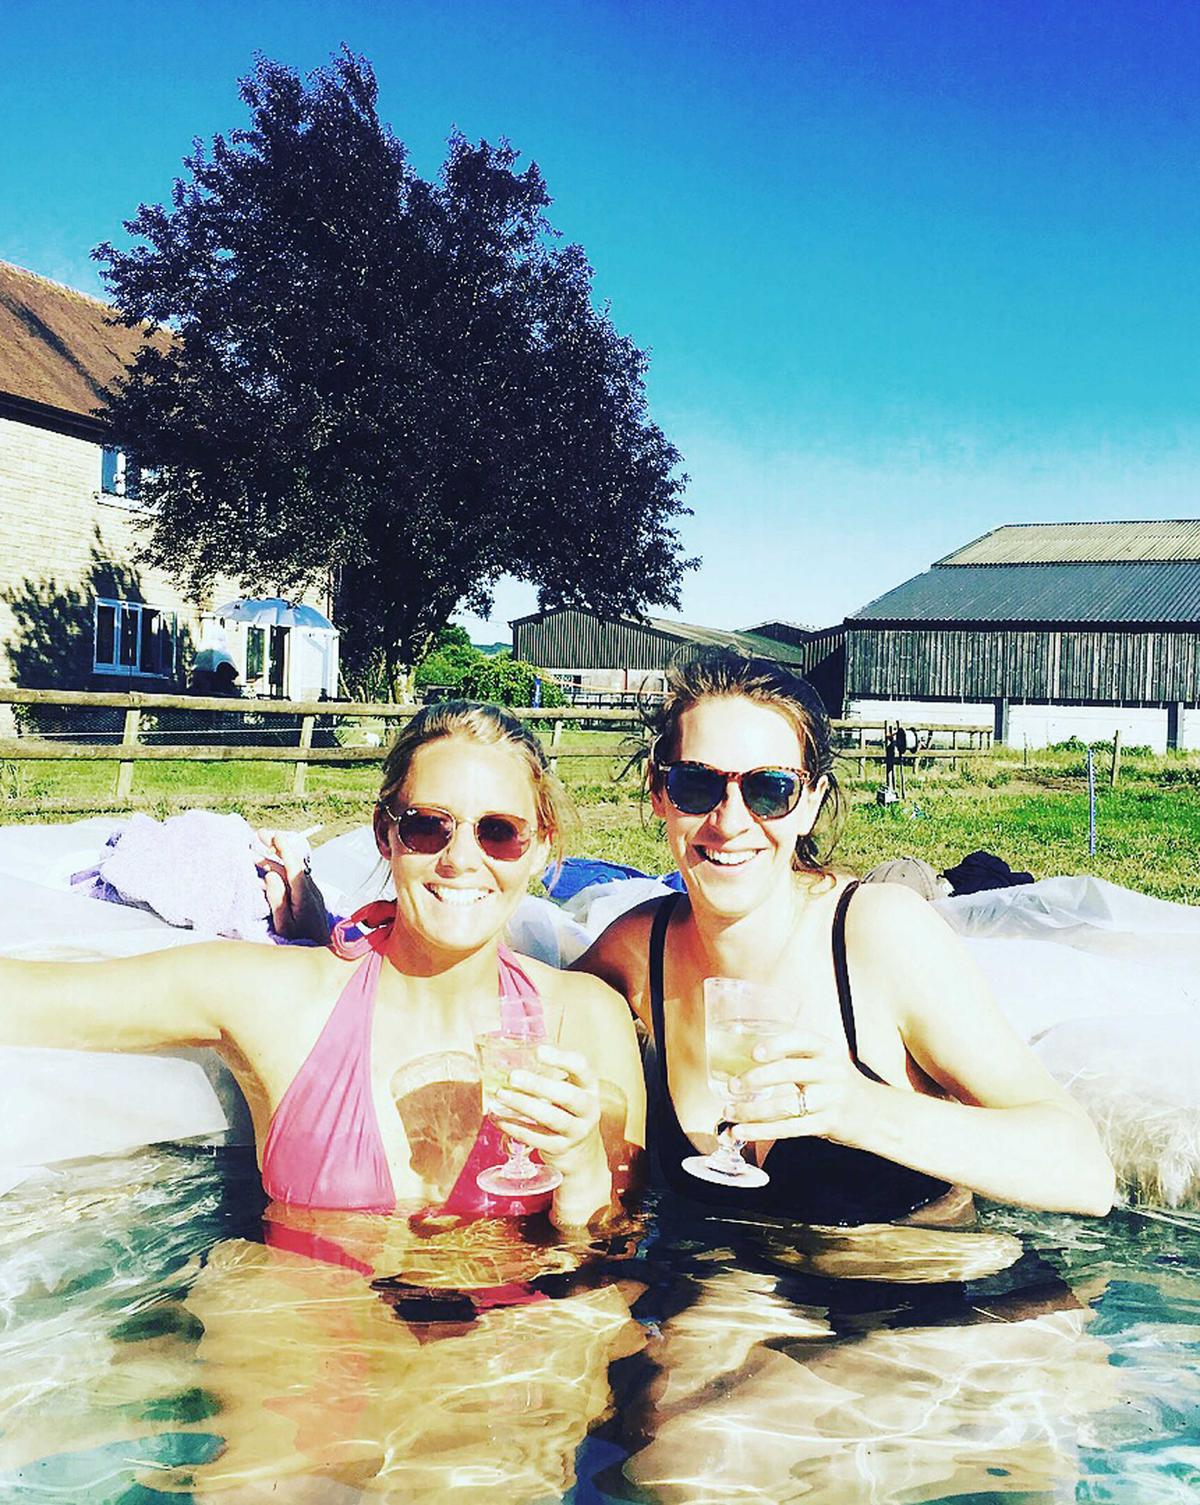 Ed's wife, Jessica (right), and friend Harriet having a drink in the hay bale pool (Caters News)